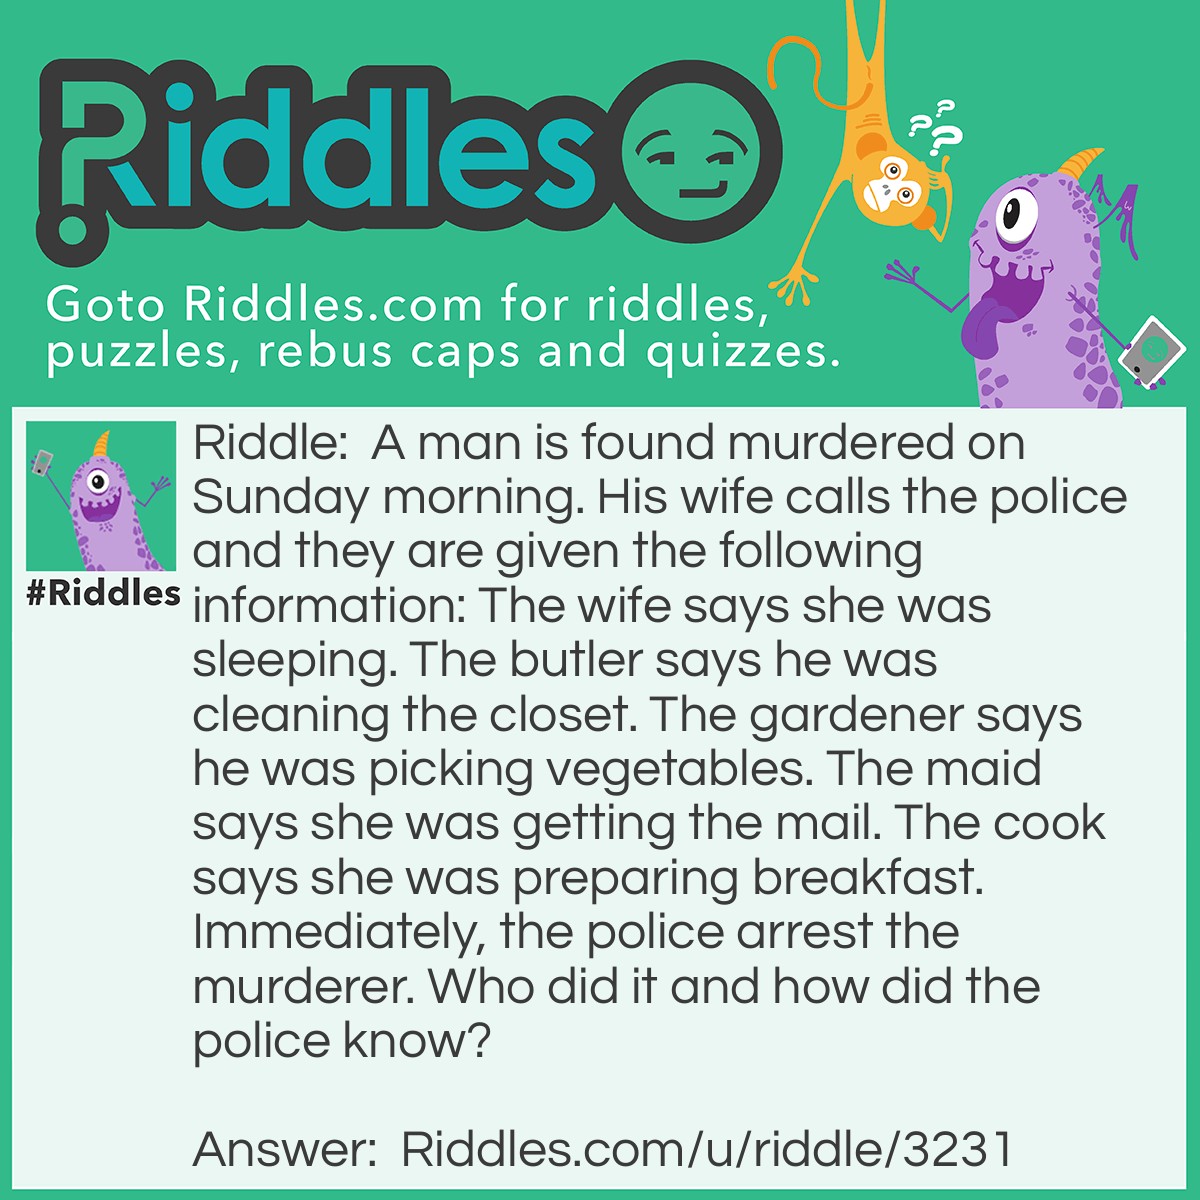 Riddle: A man is found murdered on Sunday morning. His wife calls the police and they are given the following information: The wife says she was sleeping. The butler says he was cleaning the closet. The gardener says he was picking vegetables. The maid says she was getting the mail. The cook says she was preparing breakfast. Immediately, the police arrest the murderer. Who did it and how did the police know? Answer: The maid did it because you don't get mail in Sunday!